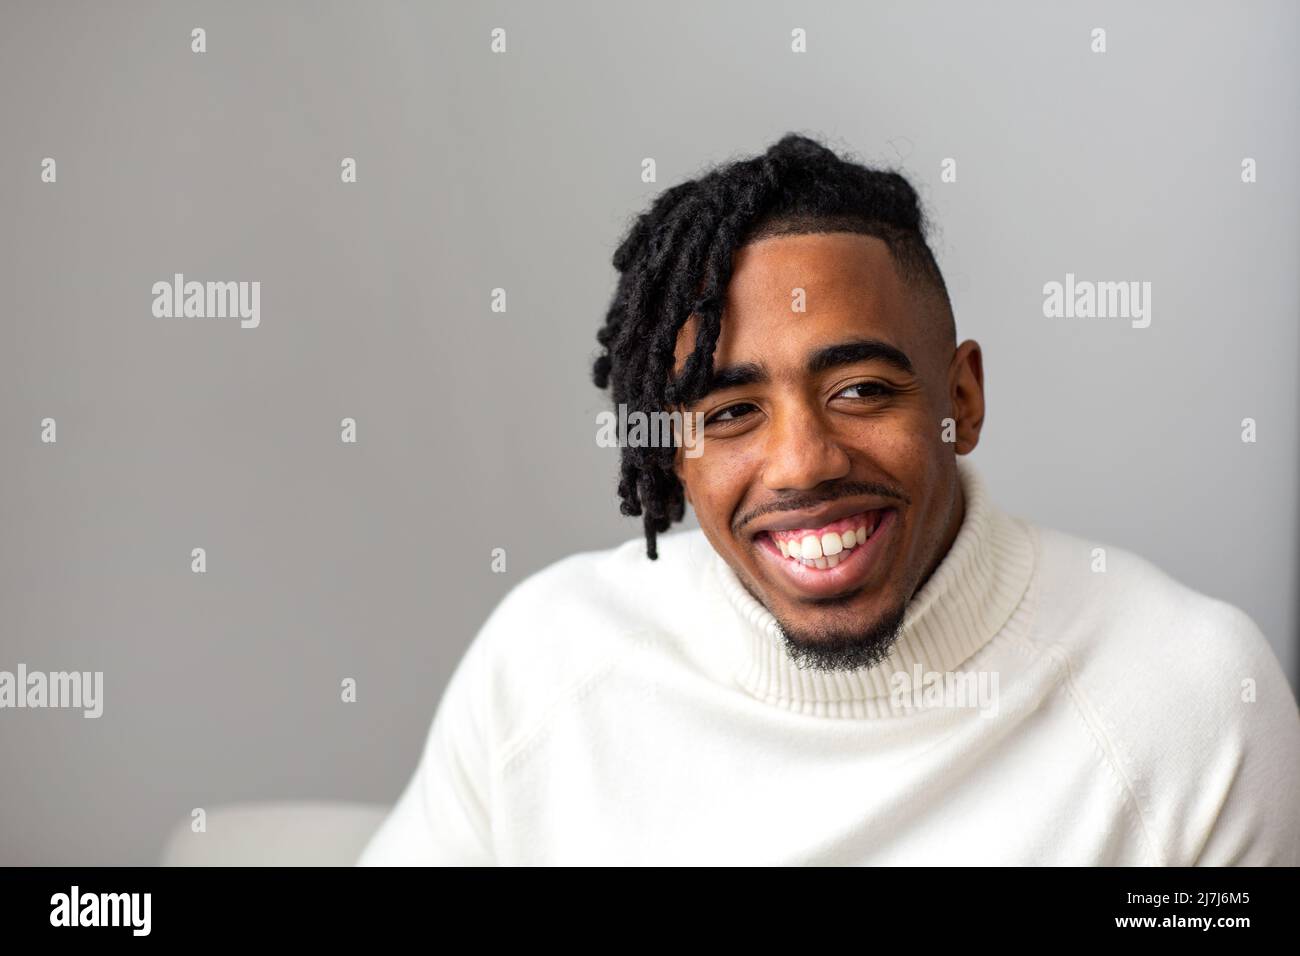 Portrait of A Young African American Man Smiling Stock Photo